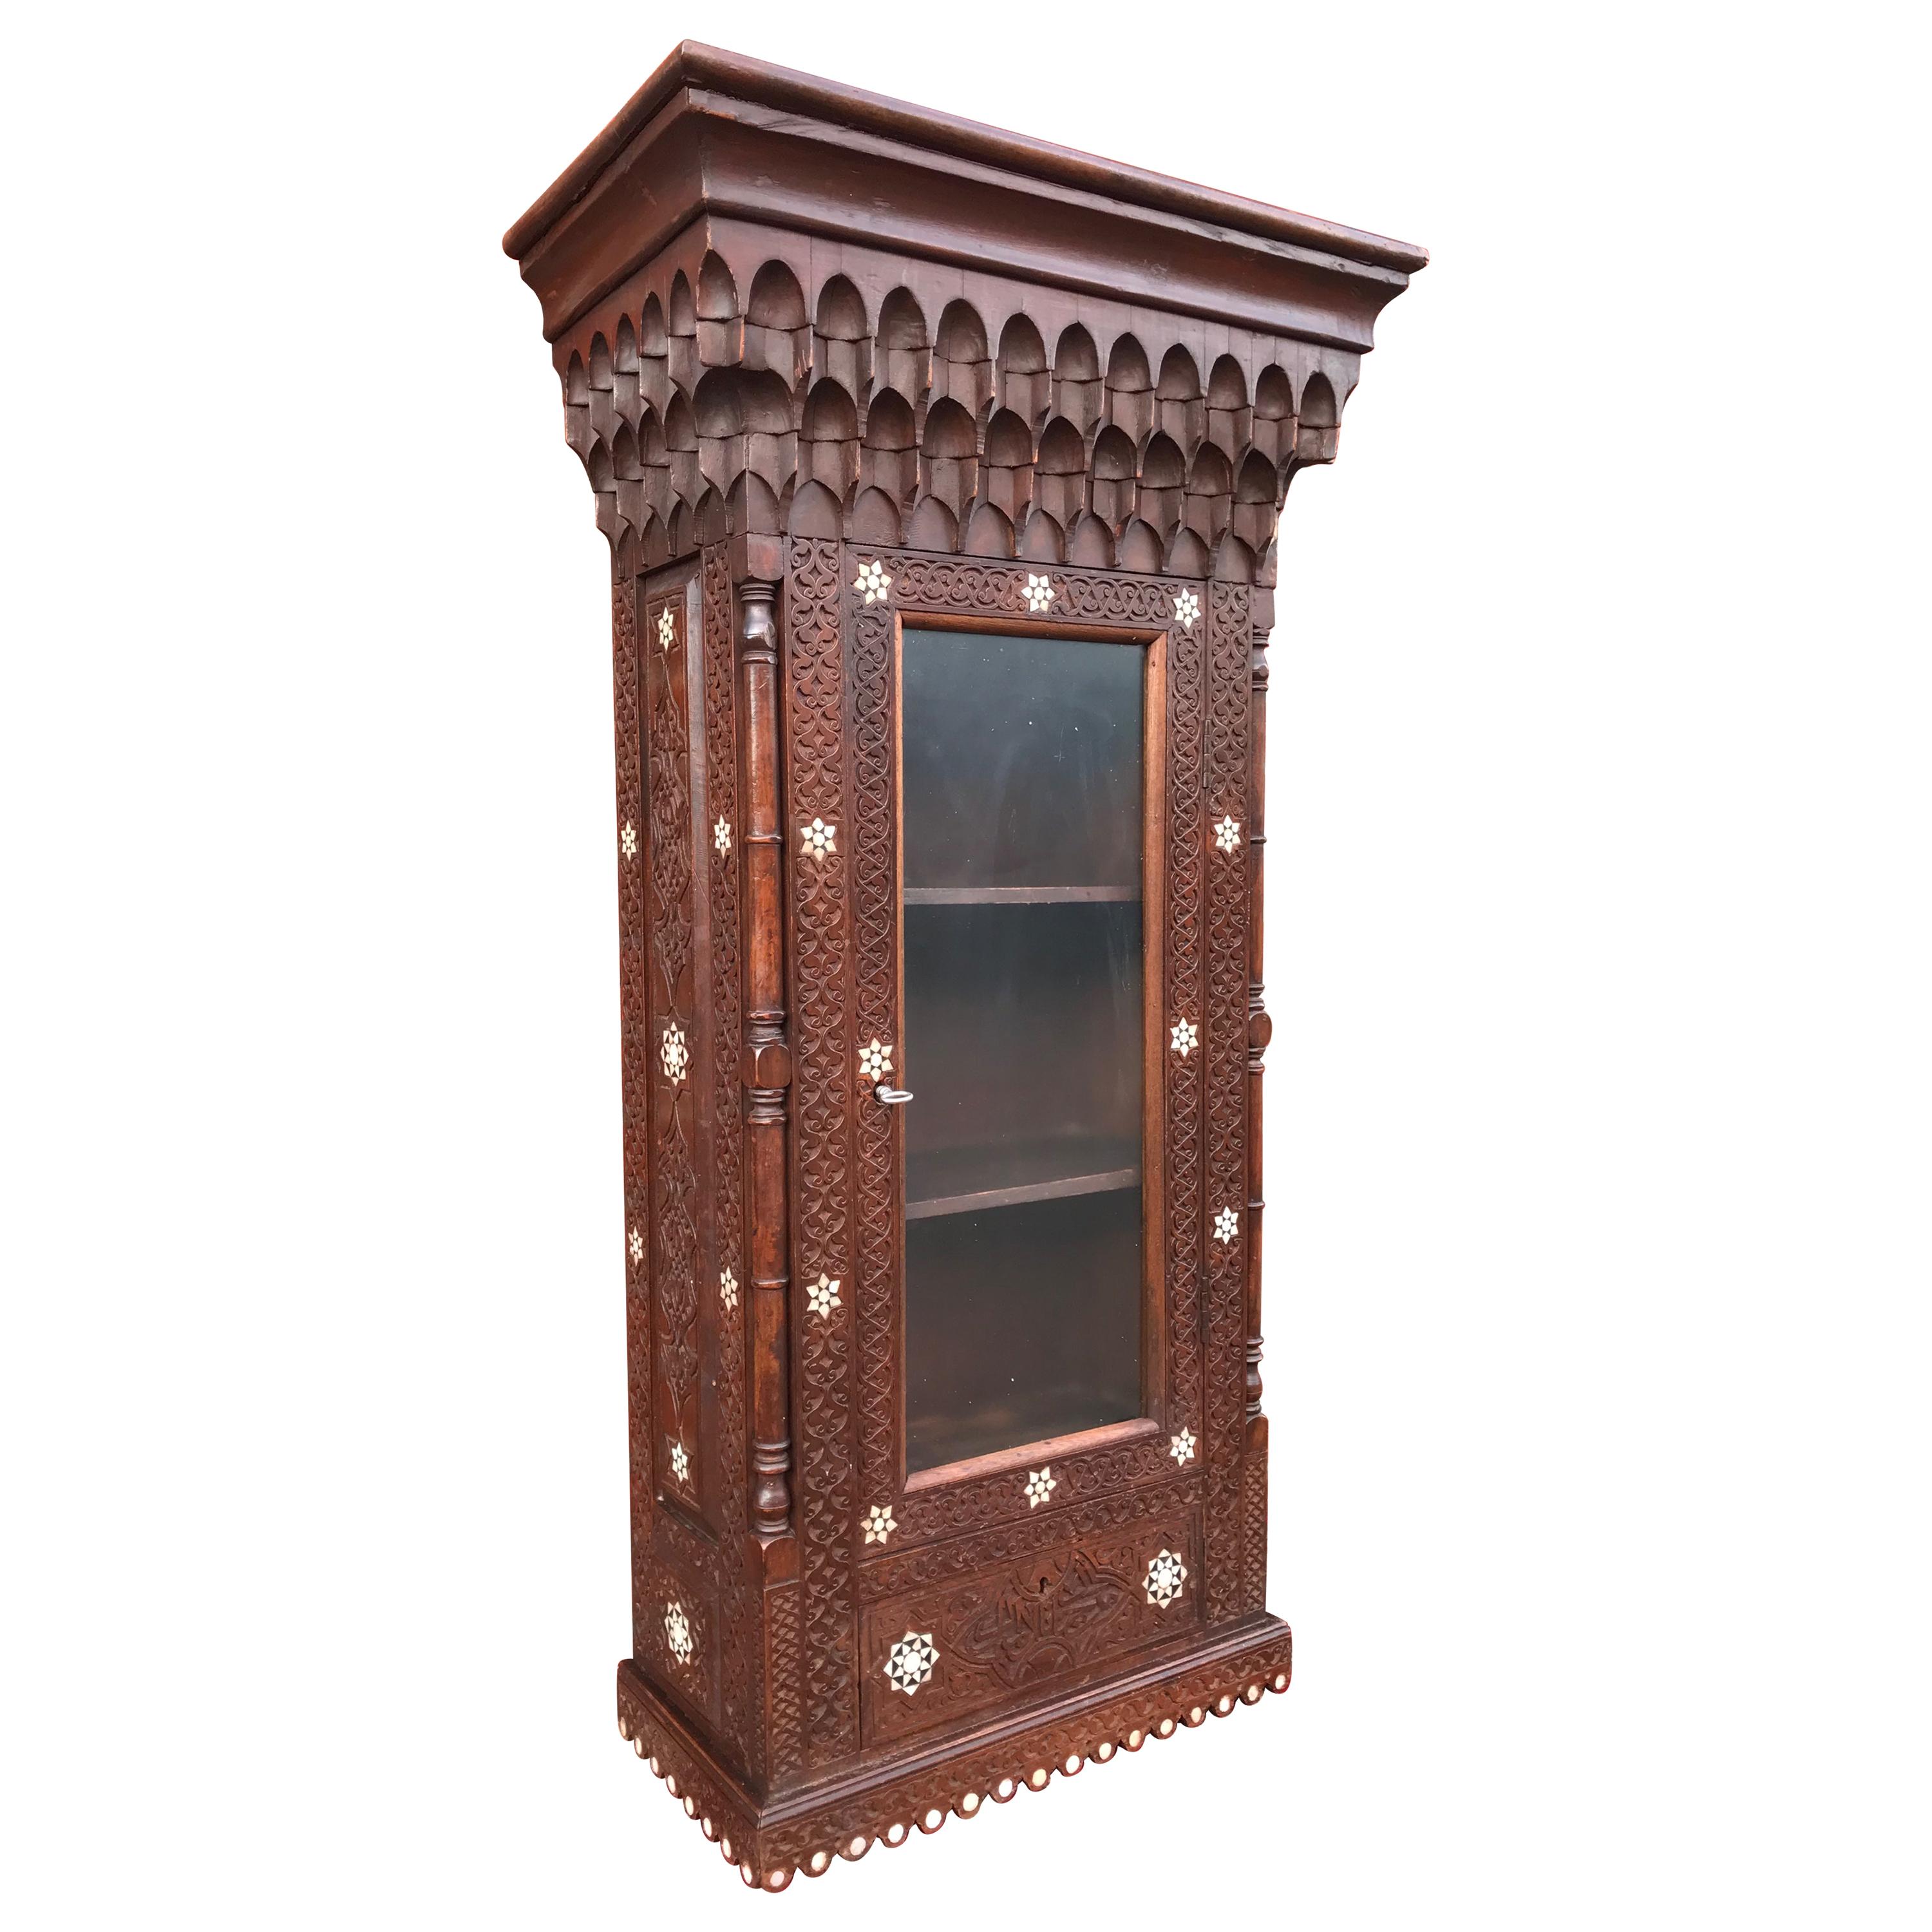 Stylish Antique Eastern Style Wooden Wall Hanging Cabinet with Intricate Details